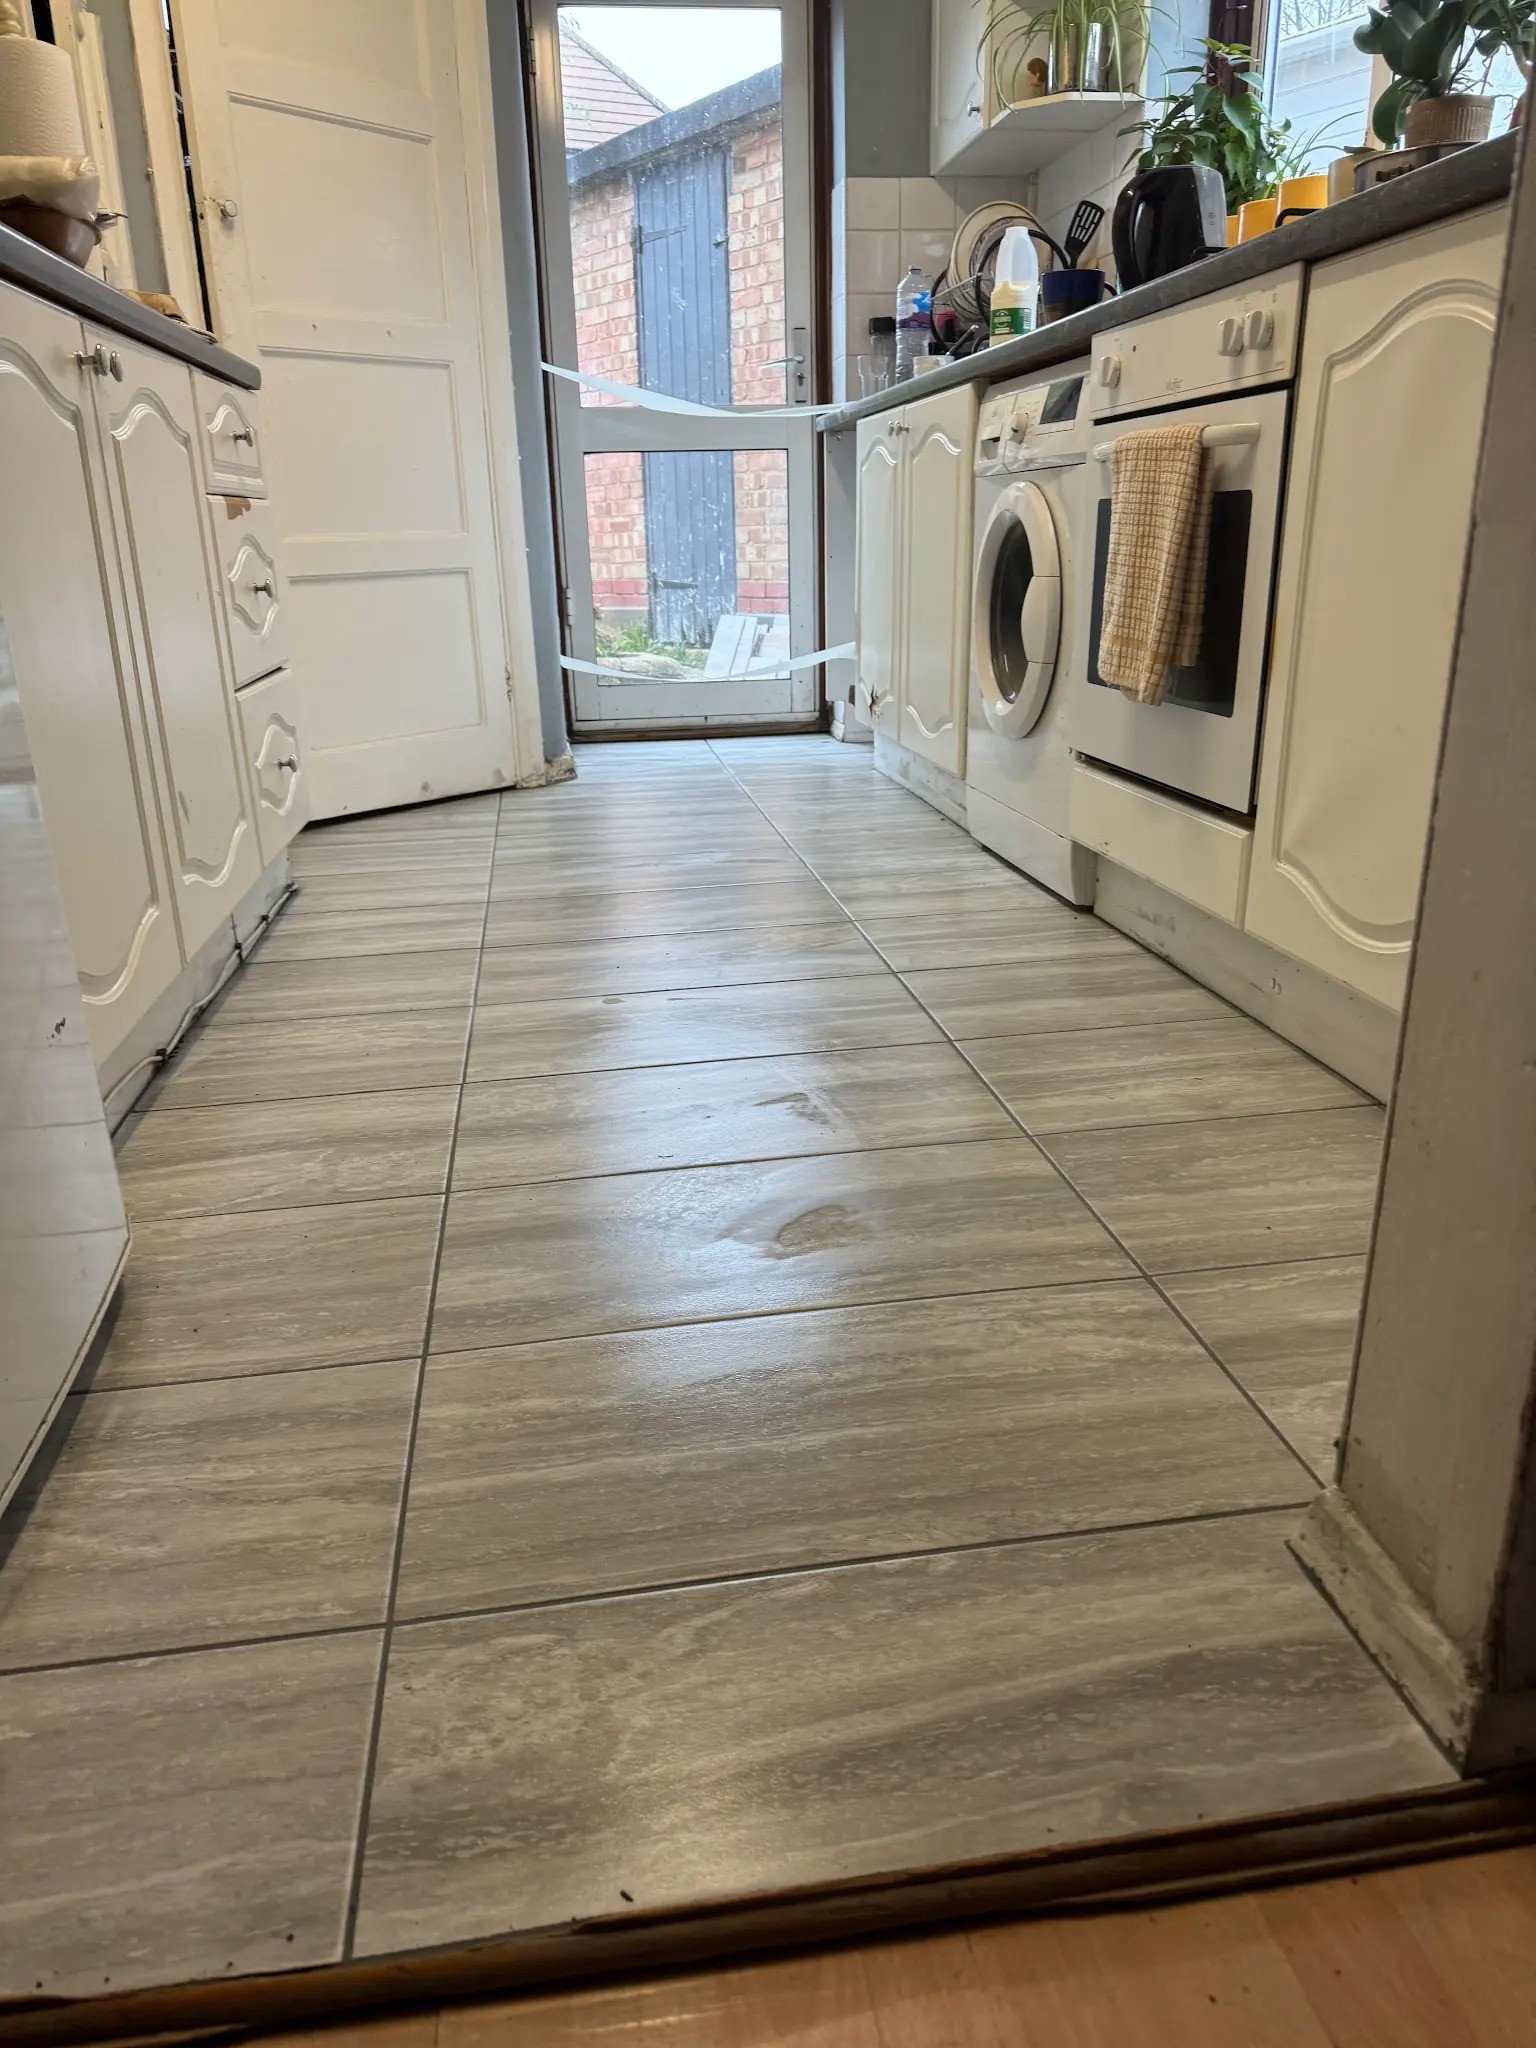 Tiles fitted on the kitchen floor